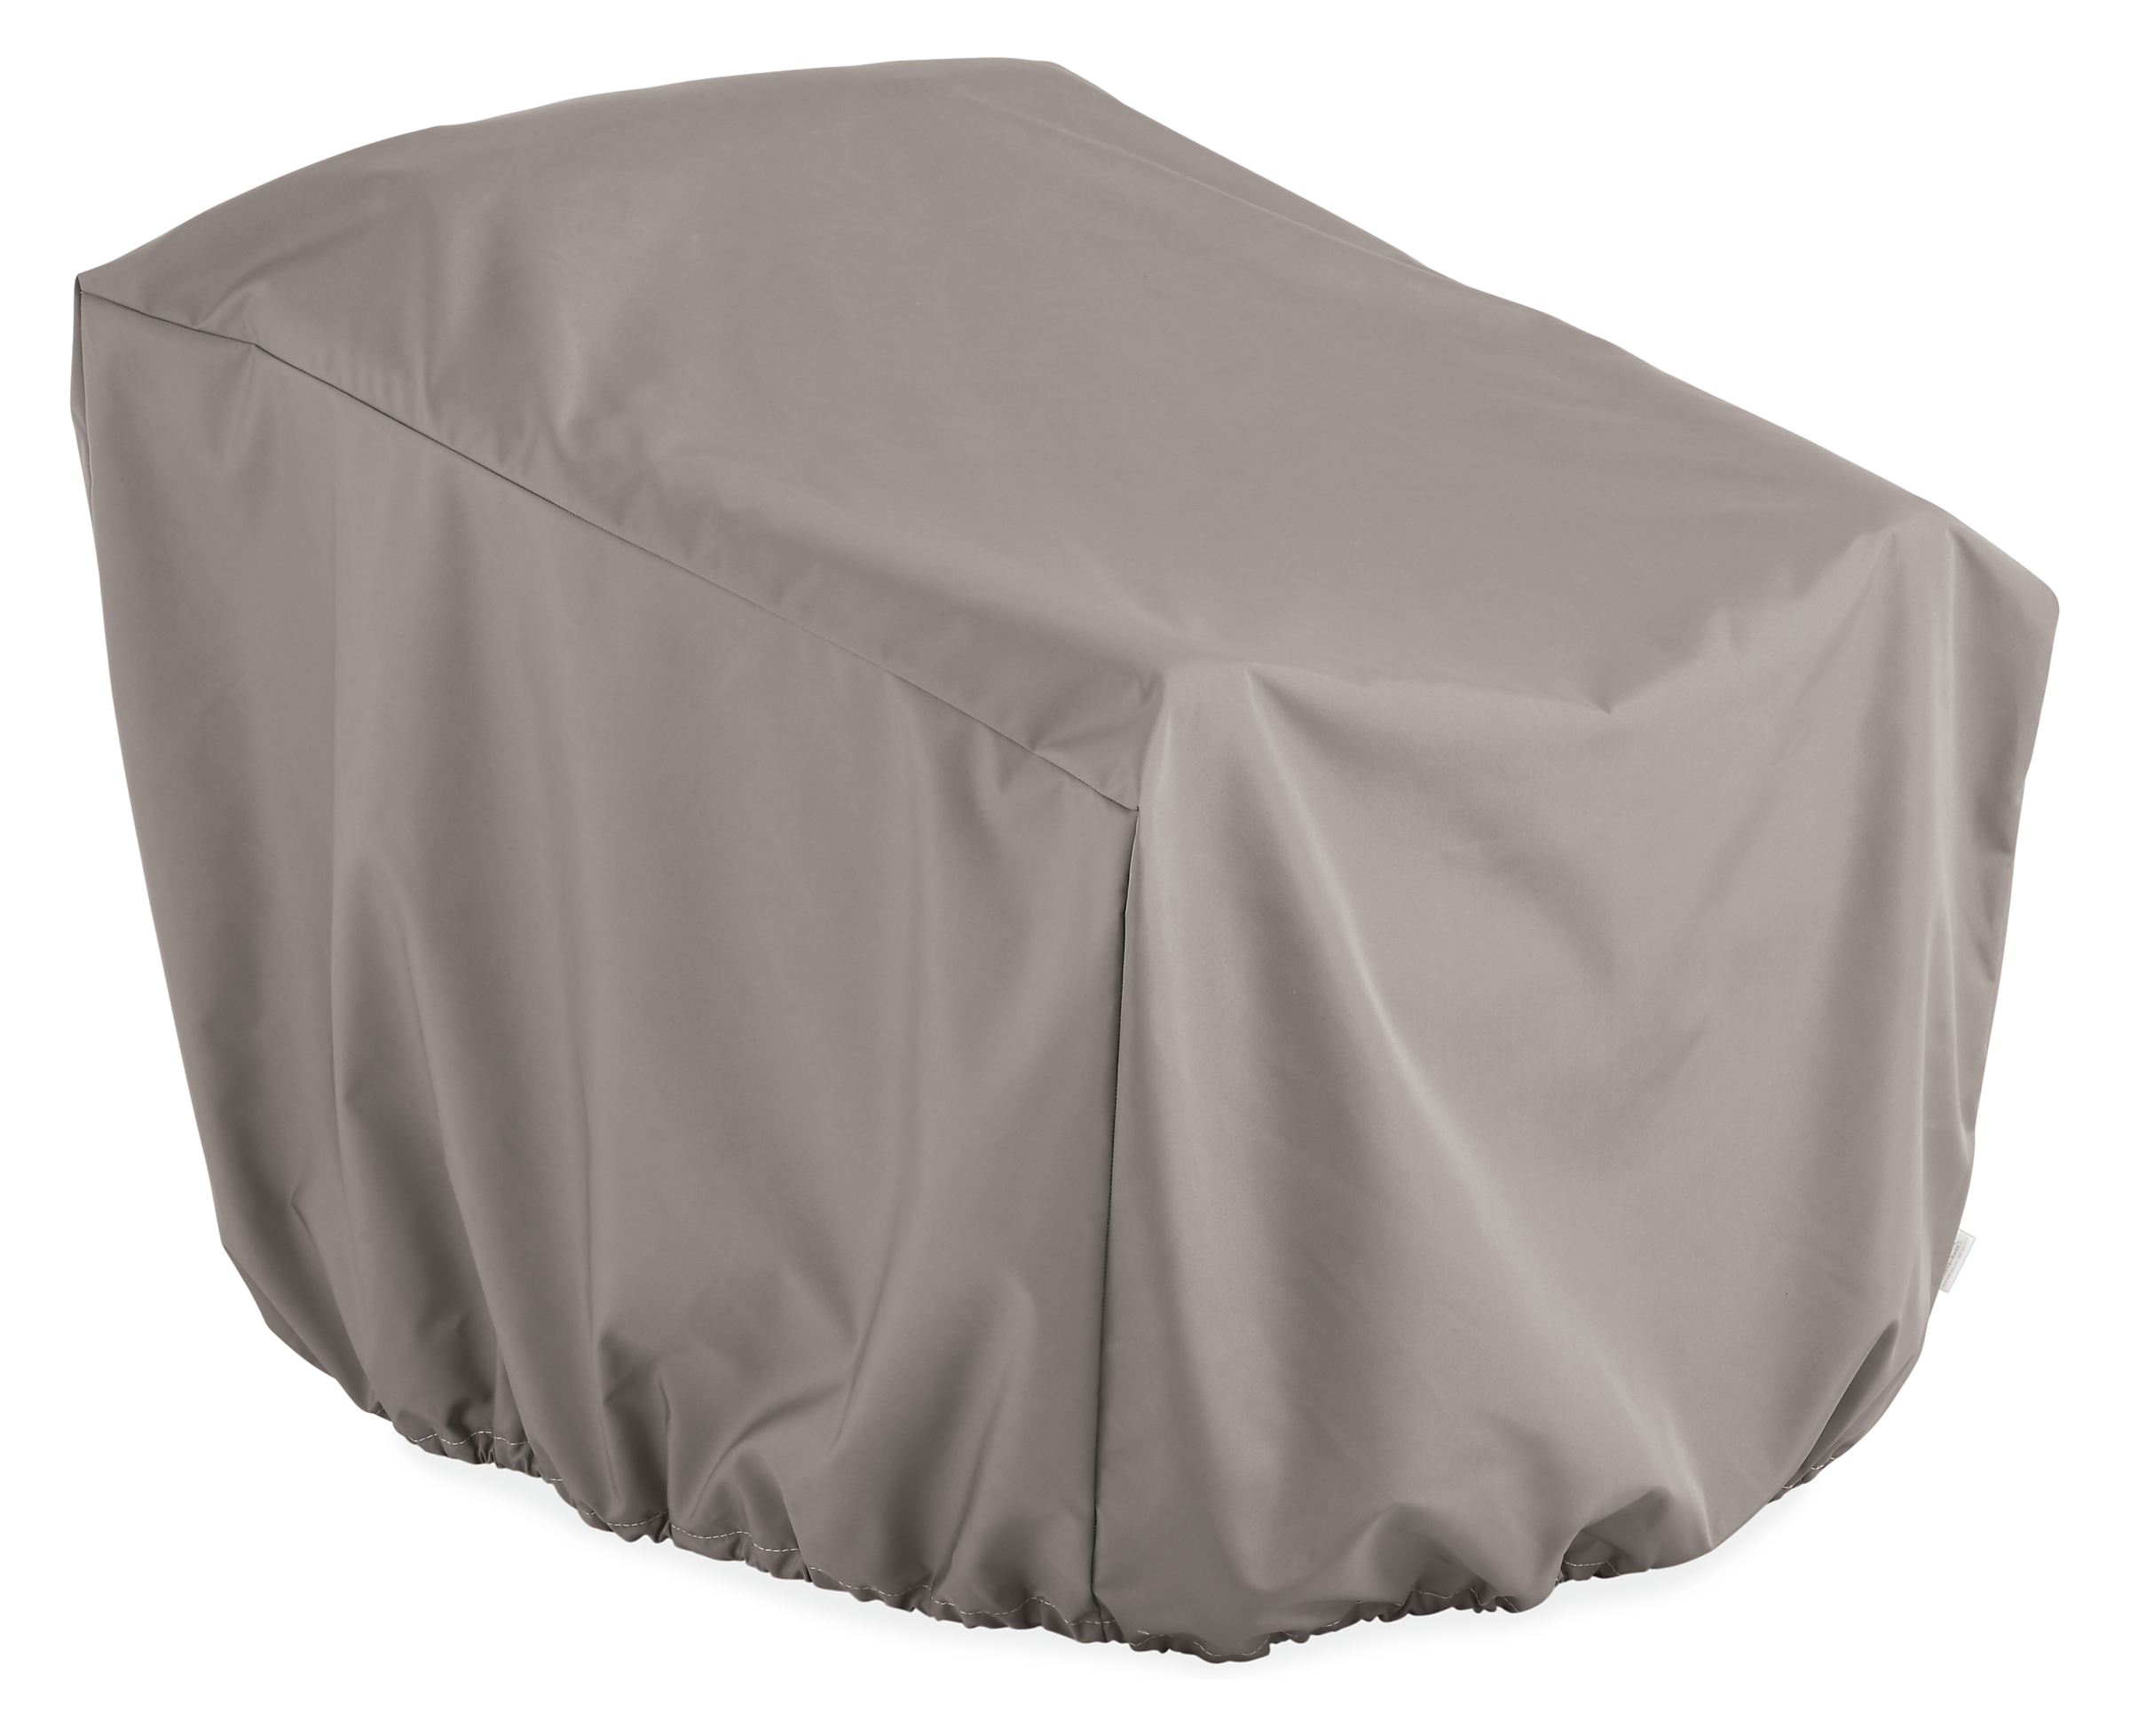 Outdoor Cover for Chair 32w 32d 30h with Drawstring